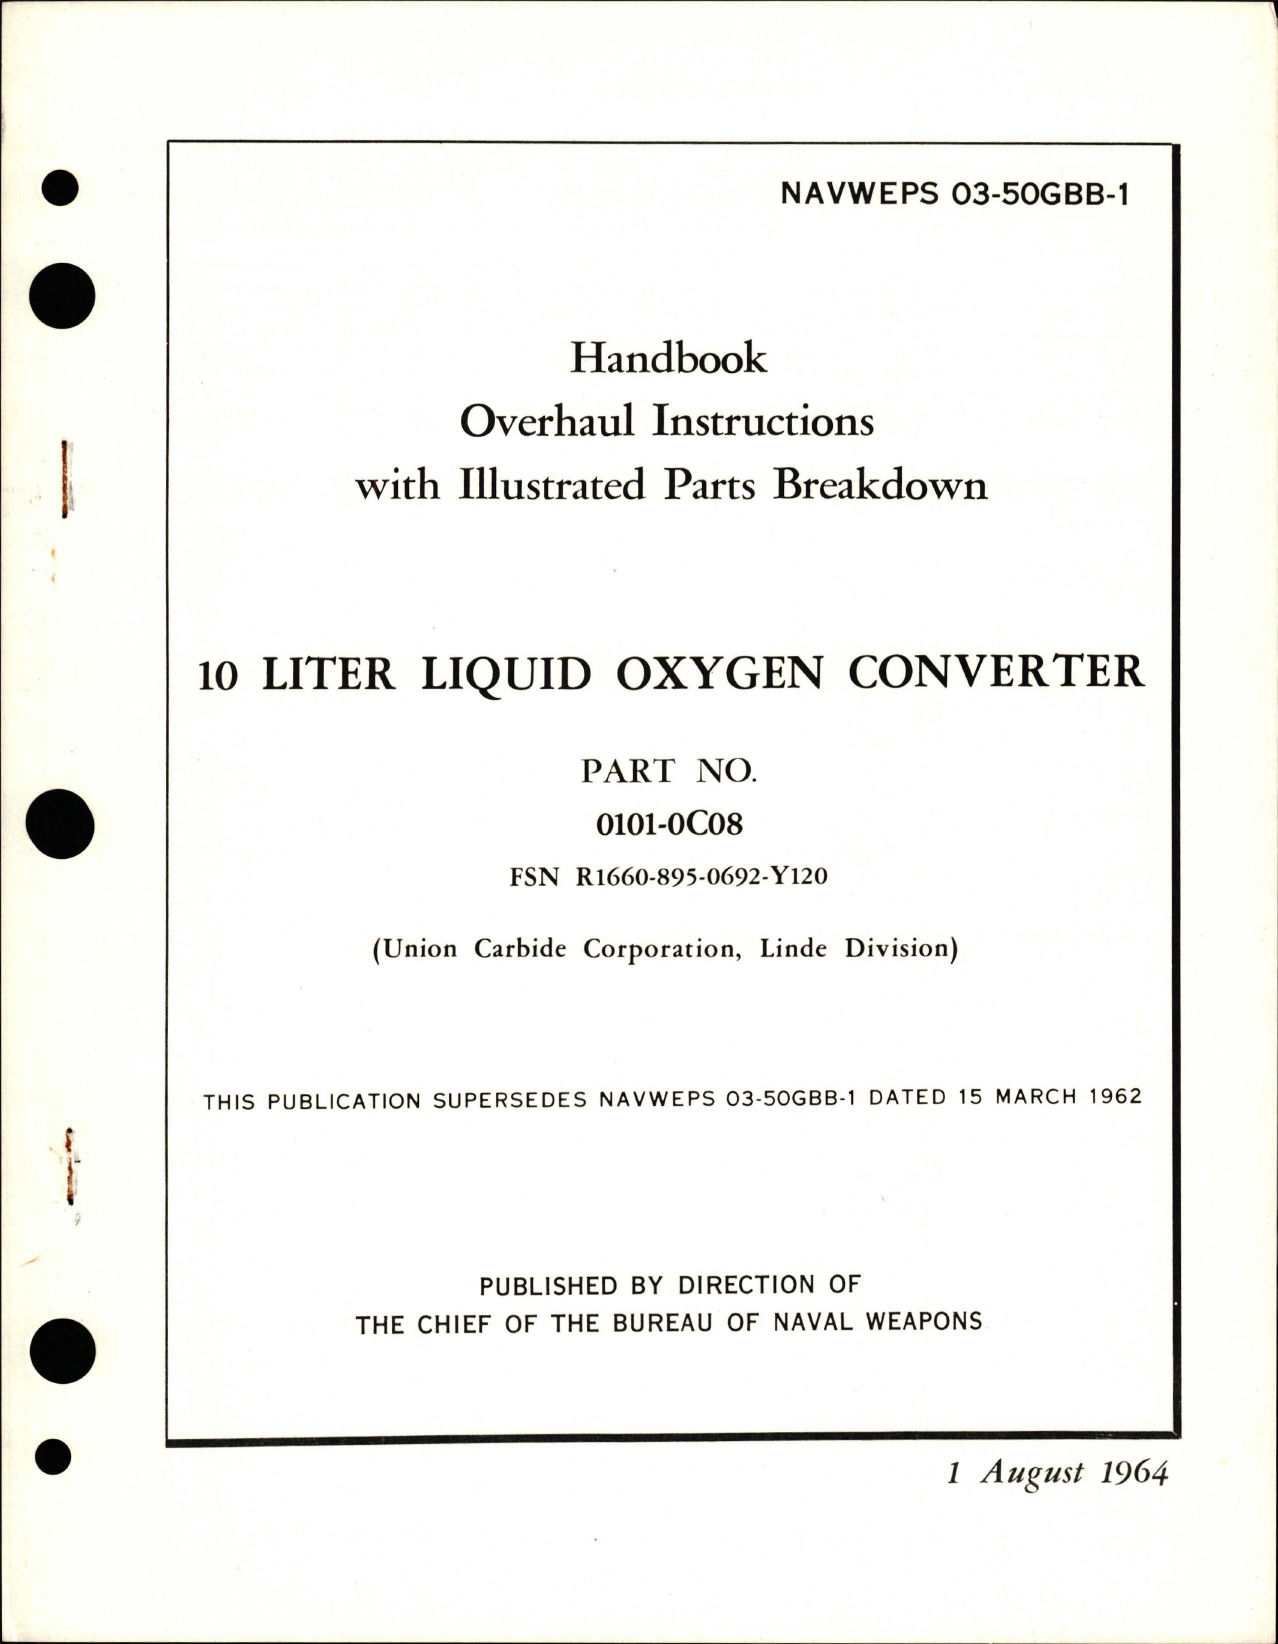 Sample page 1 from AirCorps Library document: Overhaul Instructions with Illustrated Parts Breakdown for 10 Liter Liquid Oxygen Converter - Part 0101-0C08 